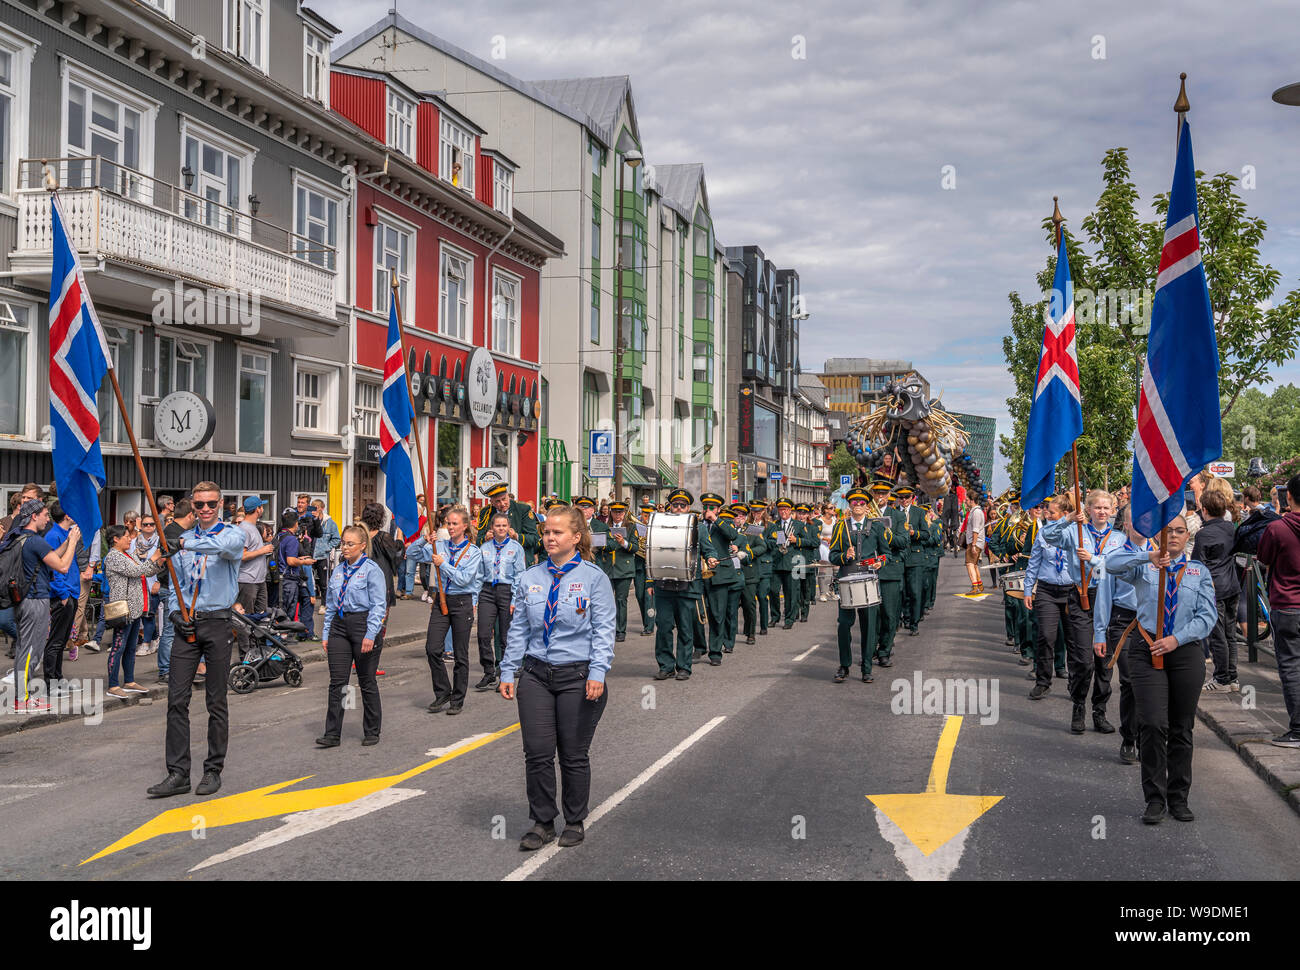 Iceland's Scouts taking part in the festivities of Independence day, June 17, Reykjavik, Iceland Stock Photo